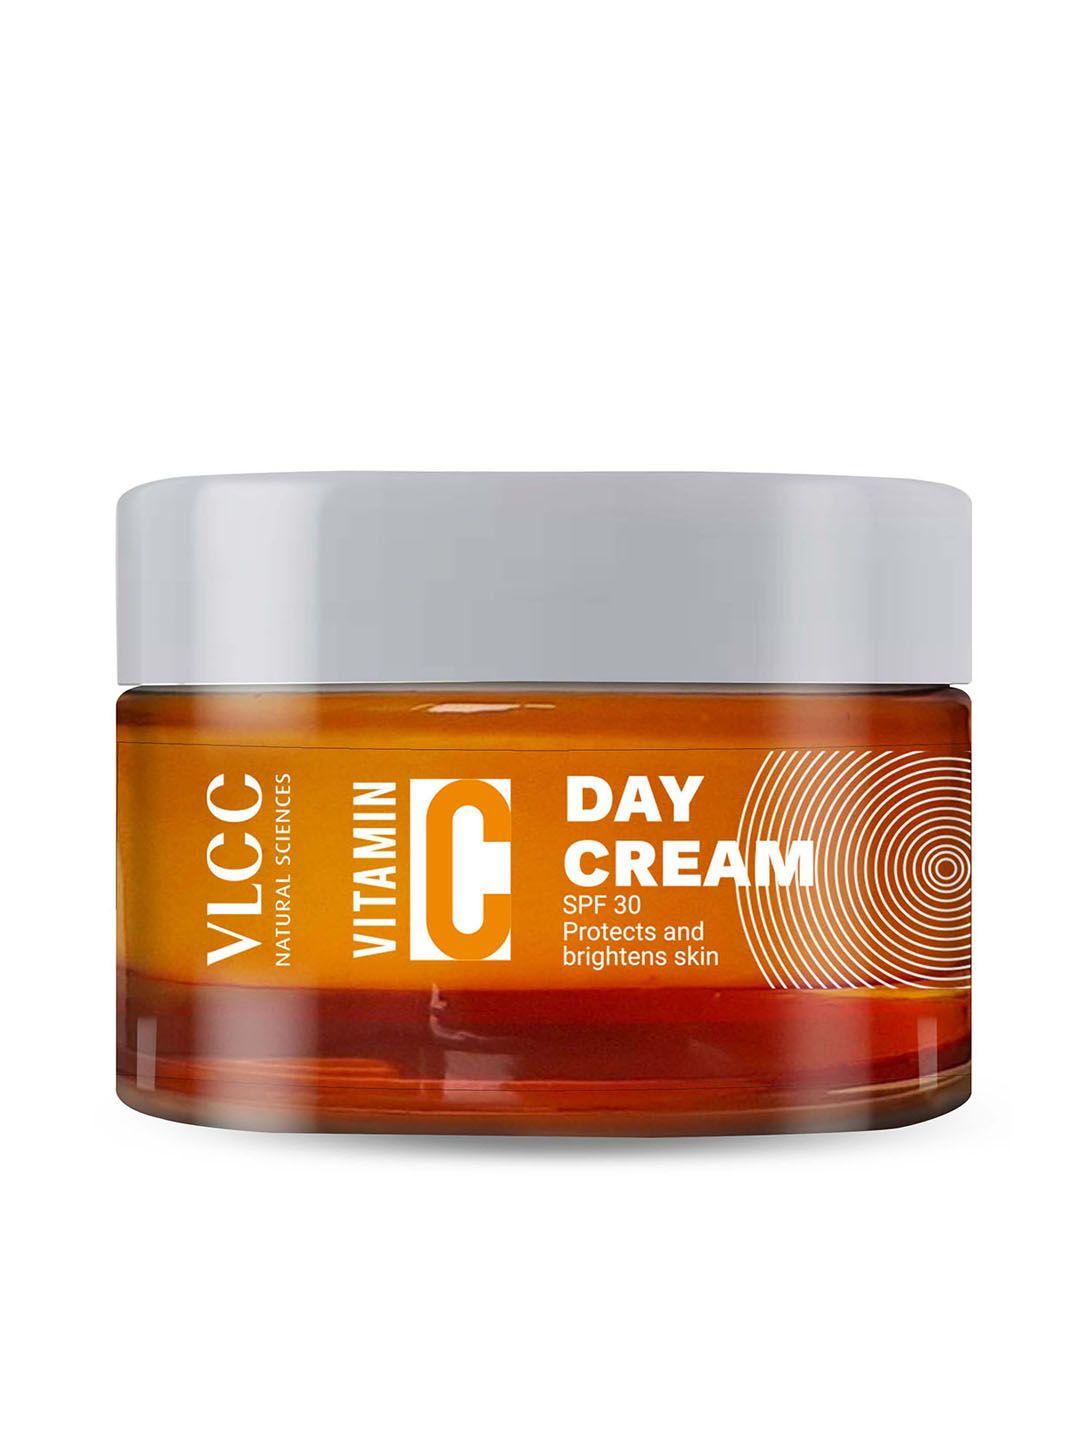 vlcc vitamin c spf 30 day cream to protect & brighten skin with green tea extract - 50 g